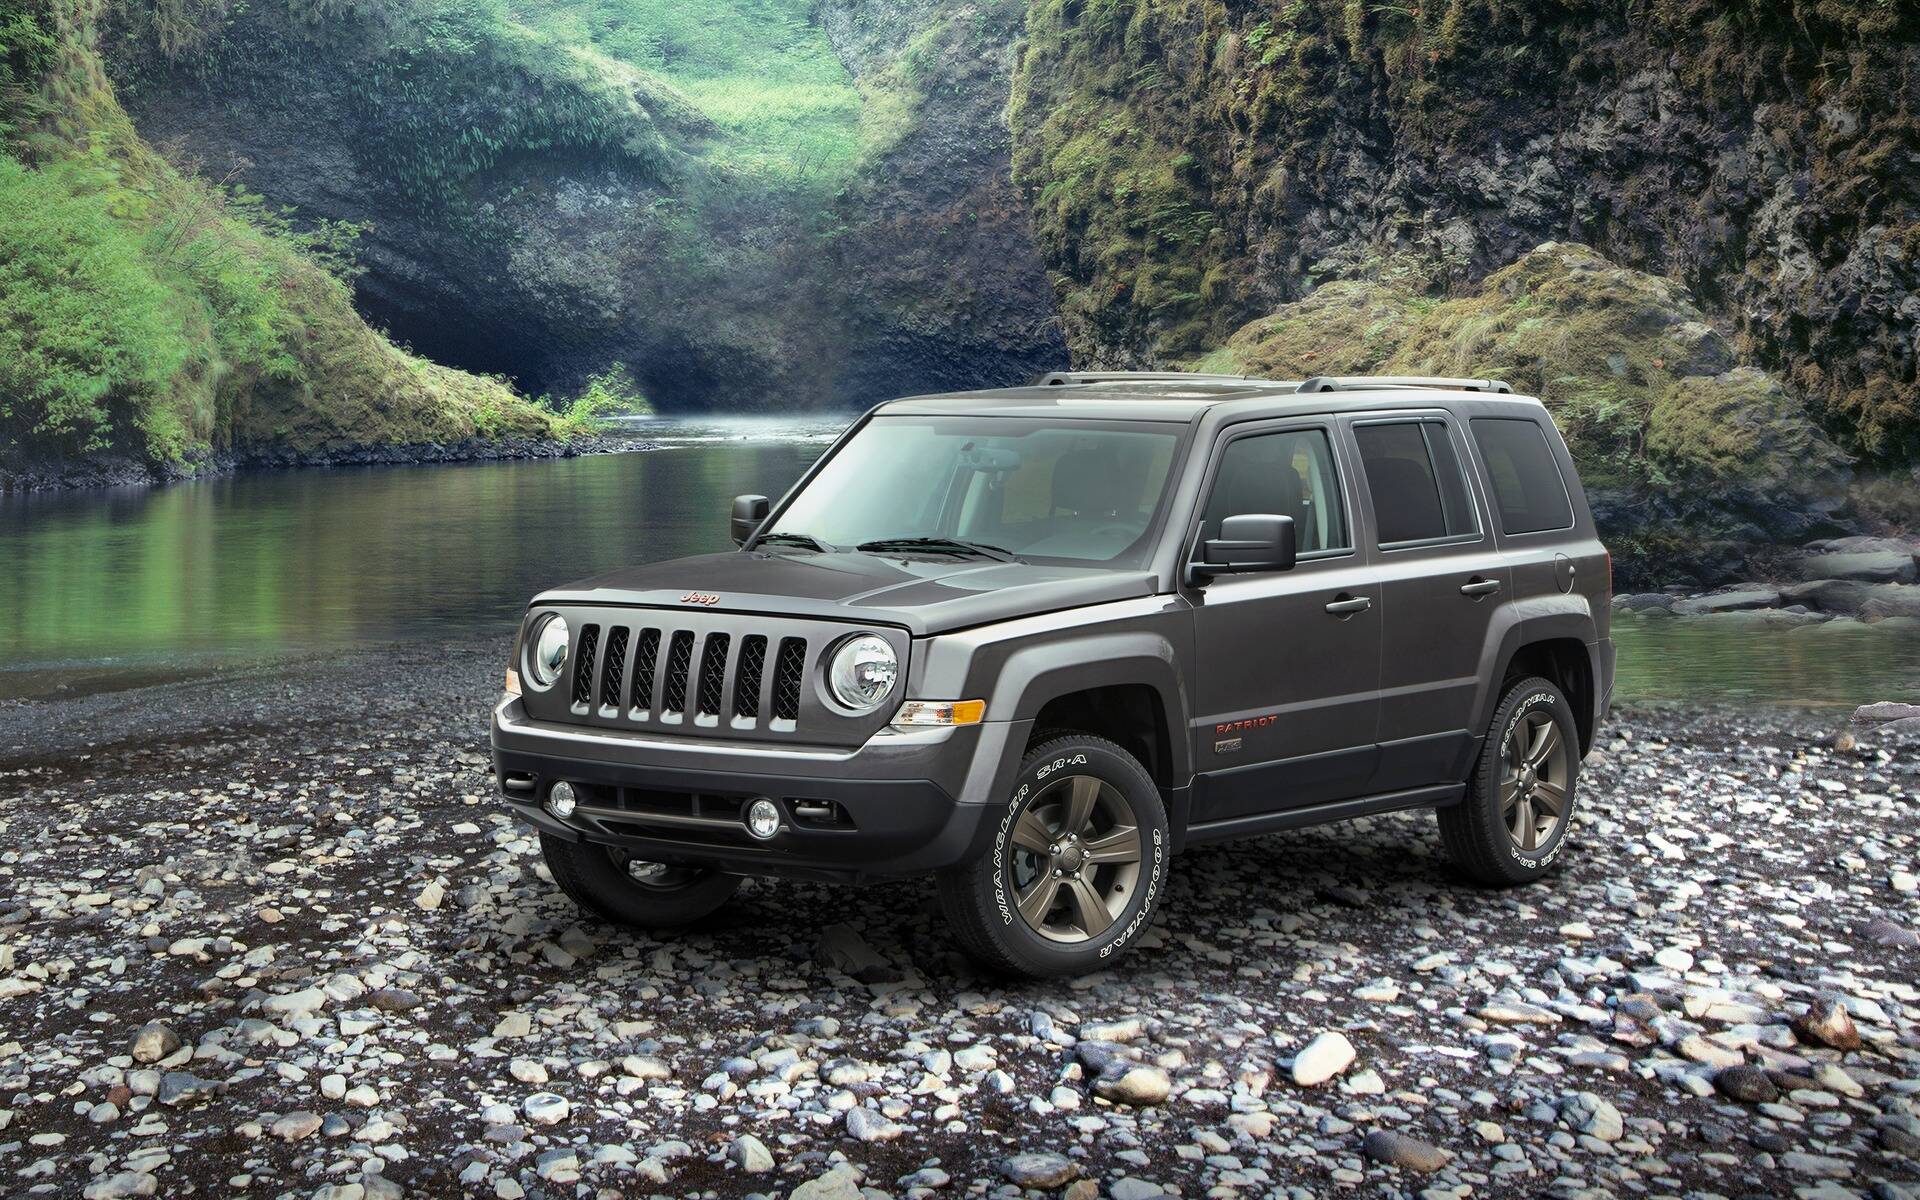 Pre-Owned Jeep Compass and Jeep Patriot: What You Need to Know - The Car  Guide